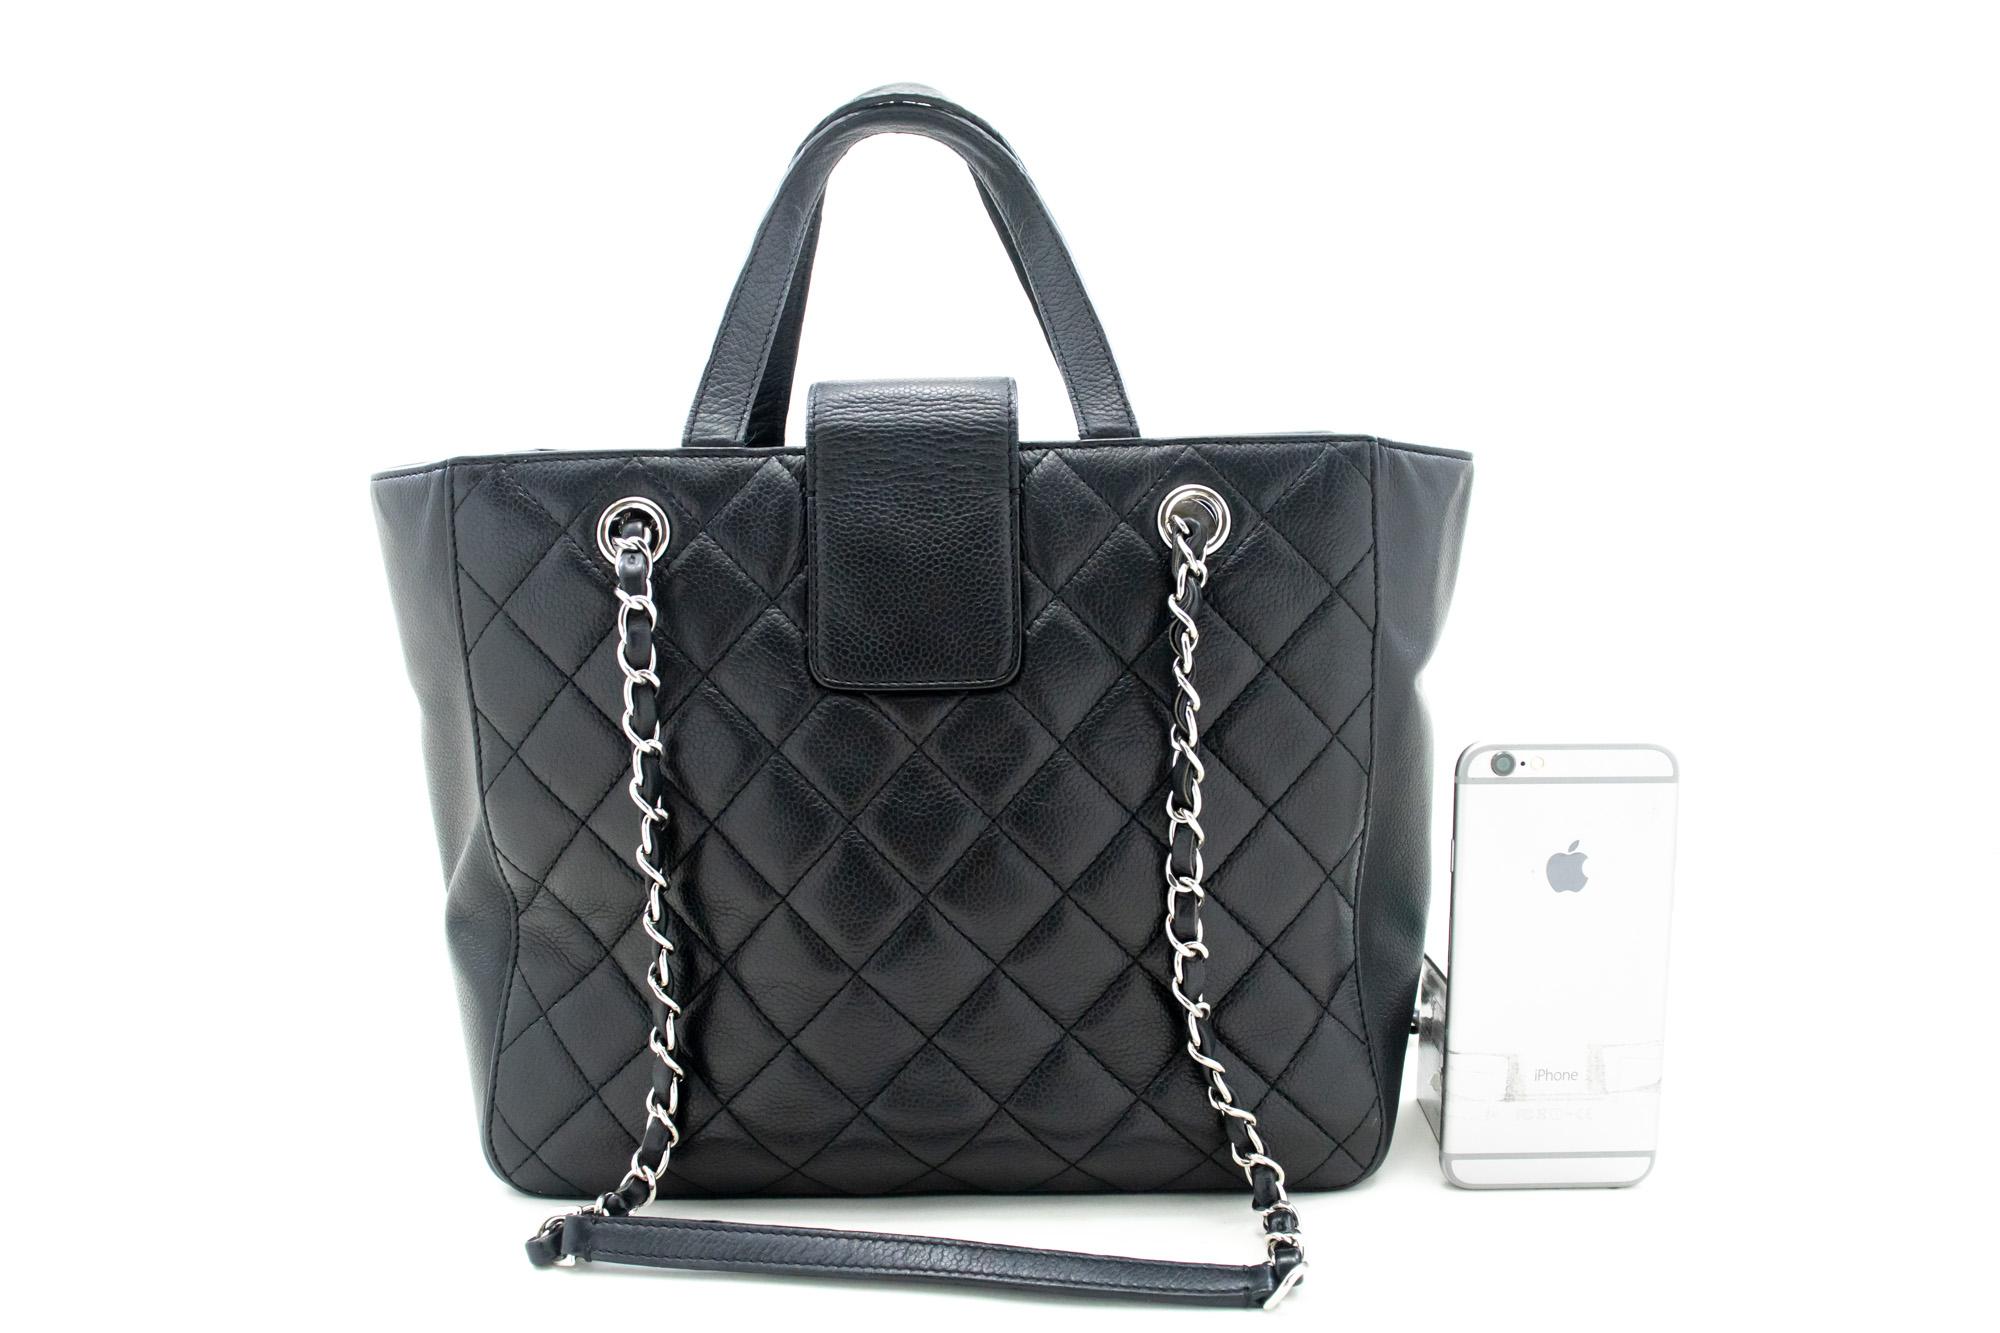 CHANEL 2 Way Chain Shoulder Bag Handbag Tote Black Caviar Quilted In Good Condition For Sale In Takamatsu-shi, JP